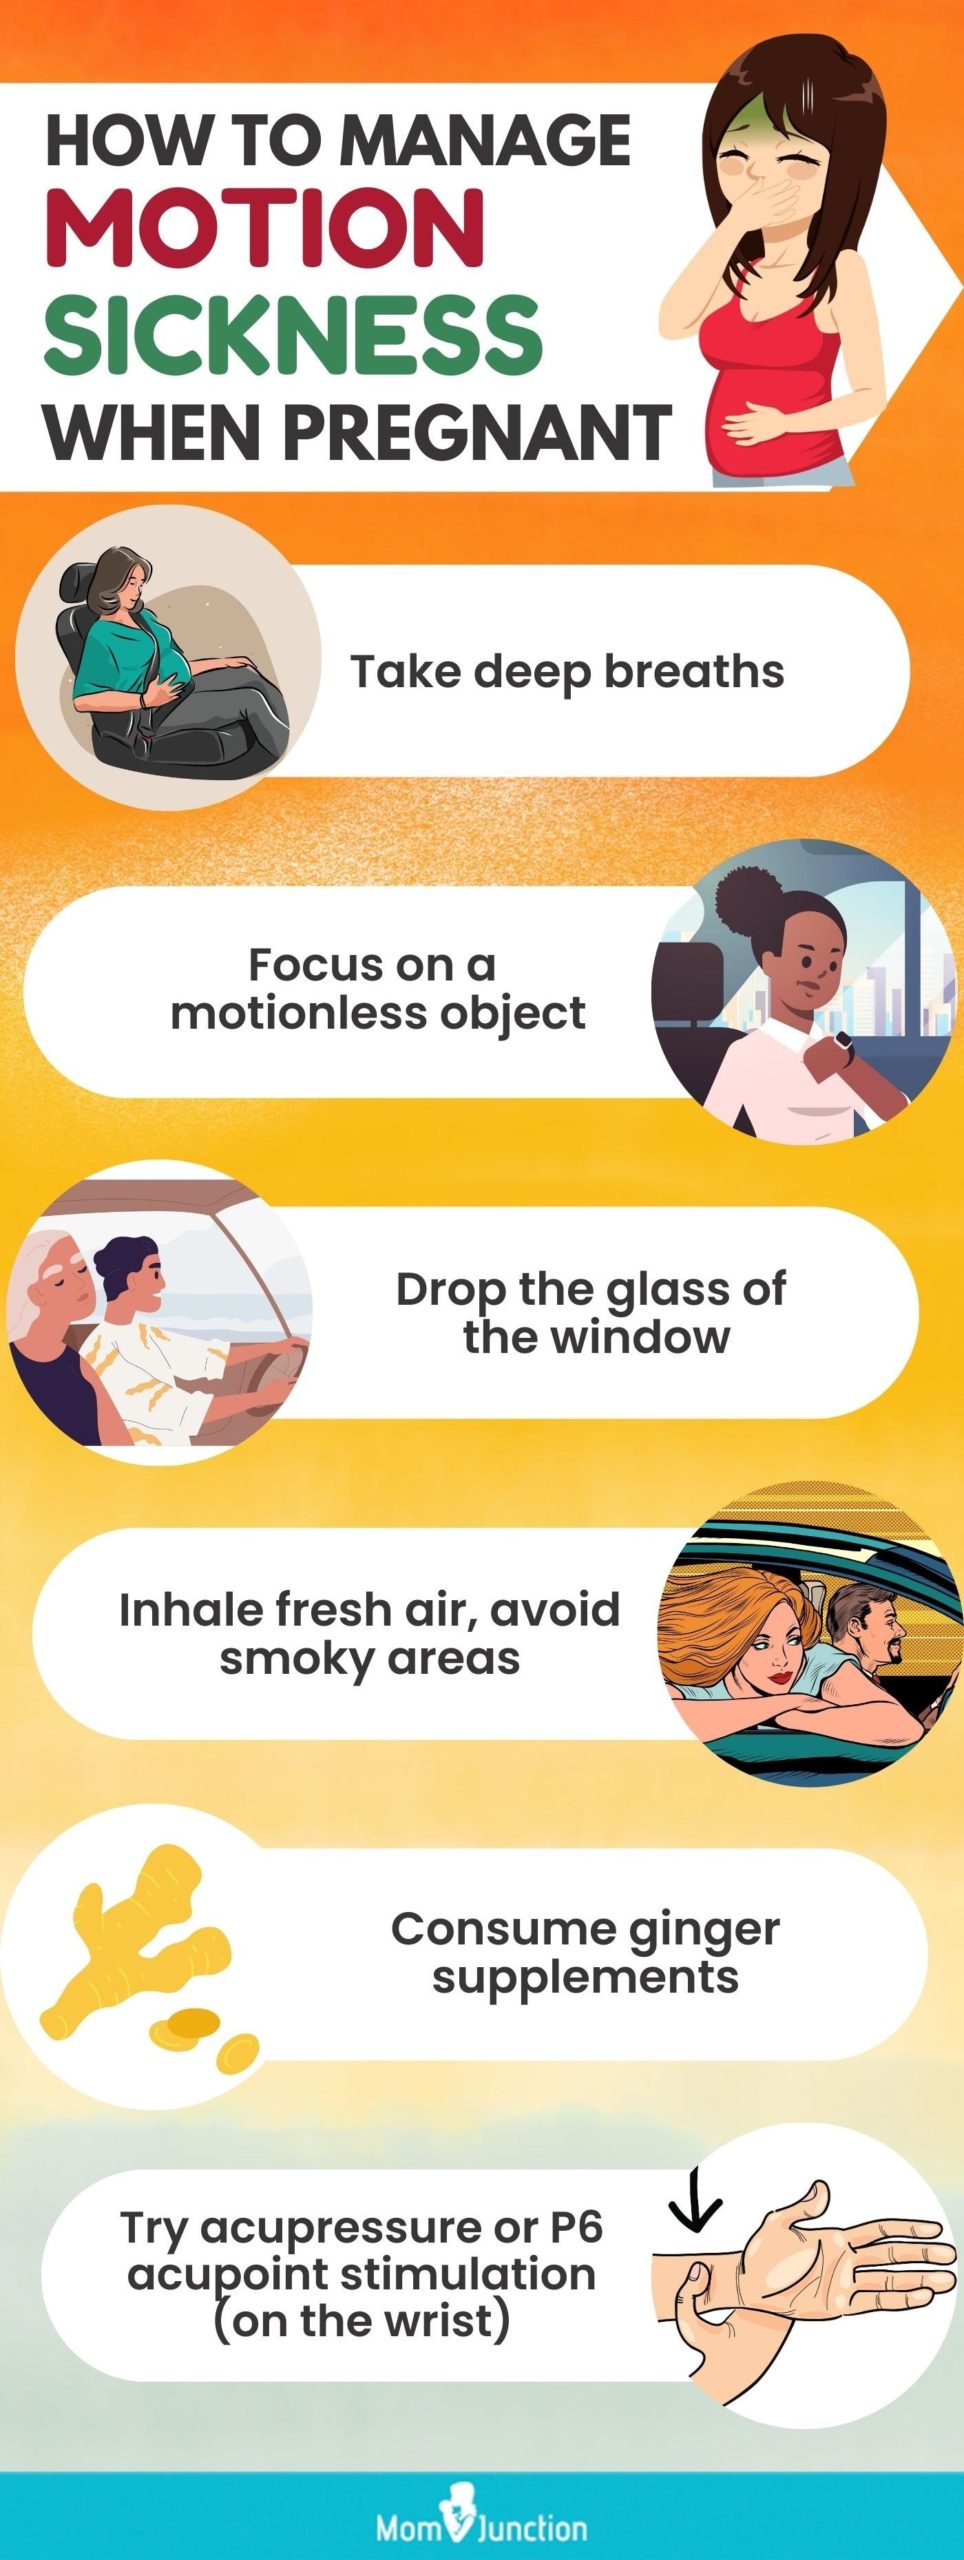 how to manage motion sickness when pregnant (infographic)